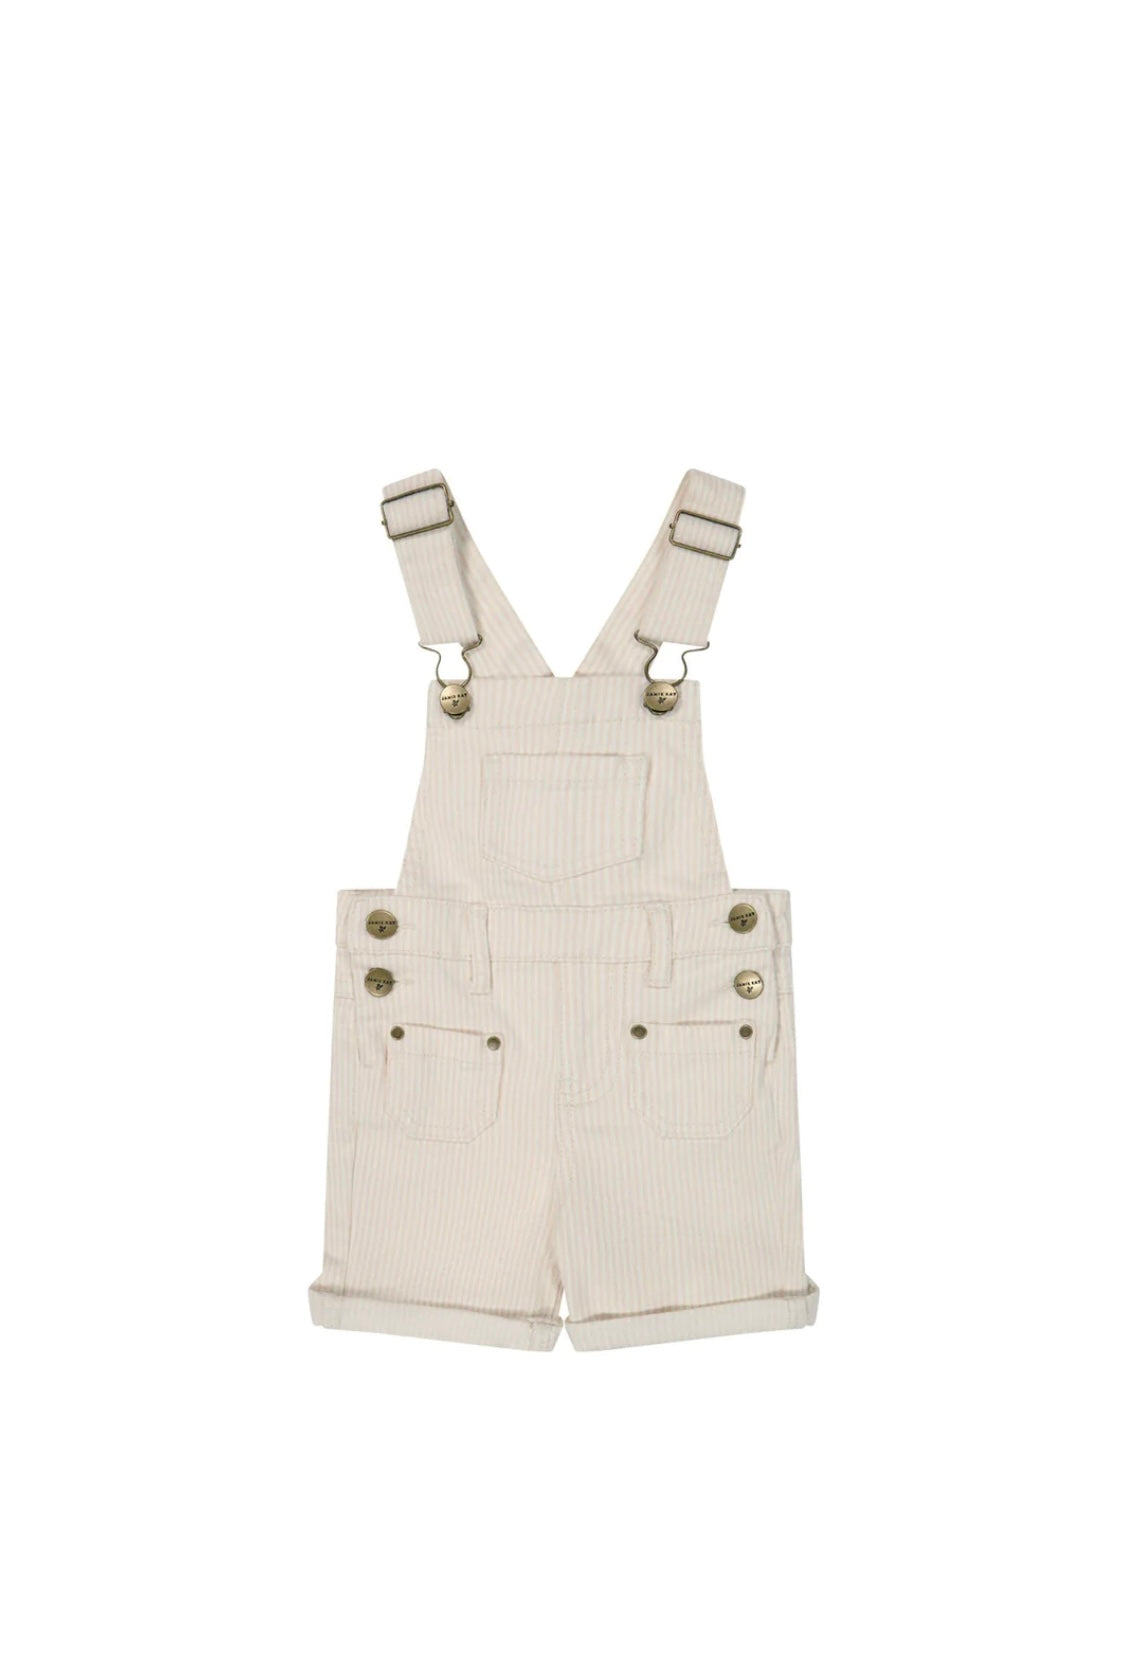 Chase Short Overall - Powder Pink/Egret